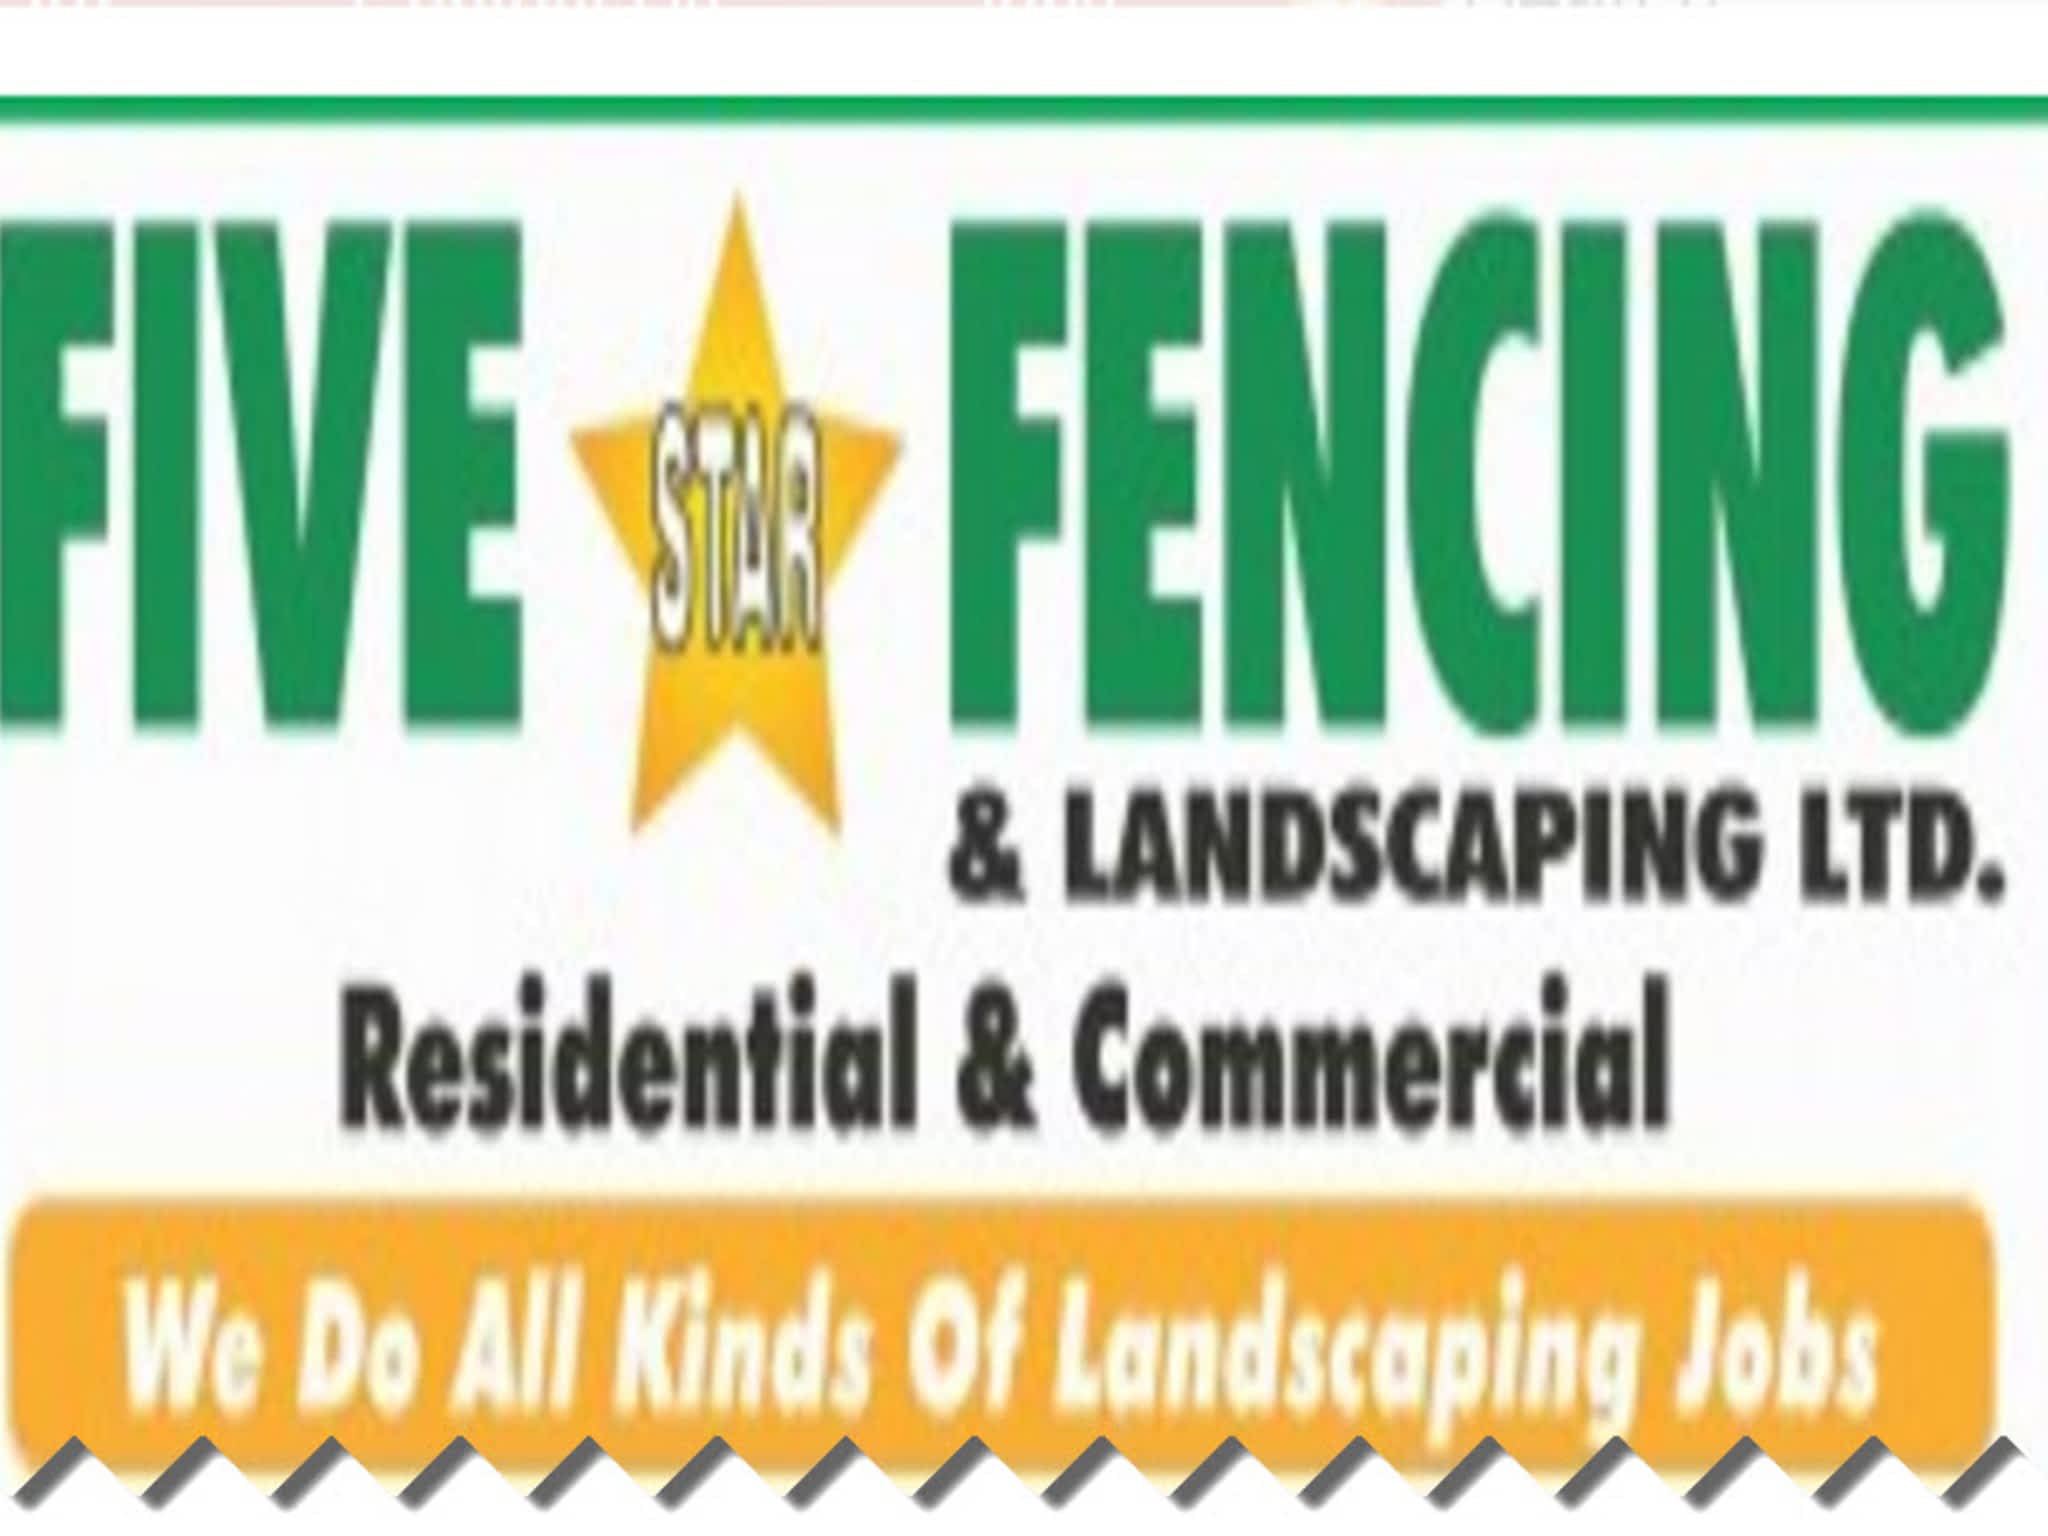 photo Five Star Fencing & Landscaping